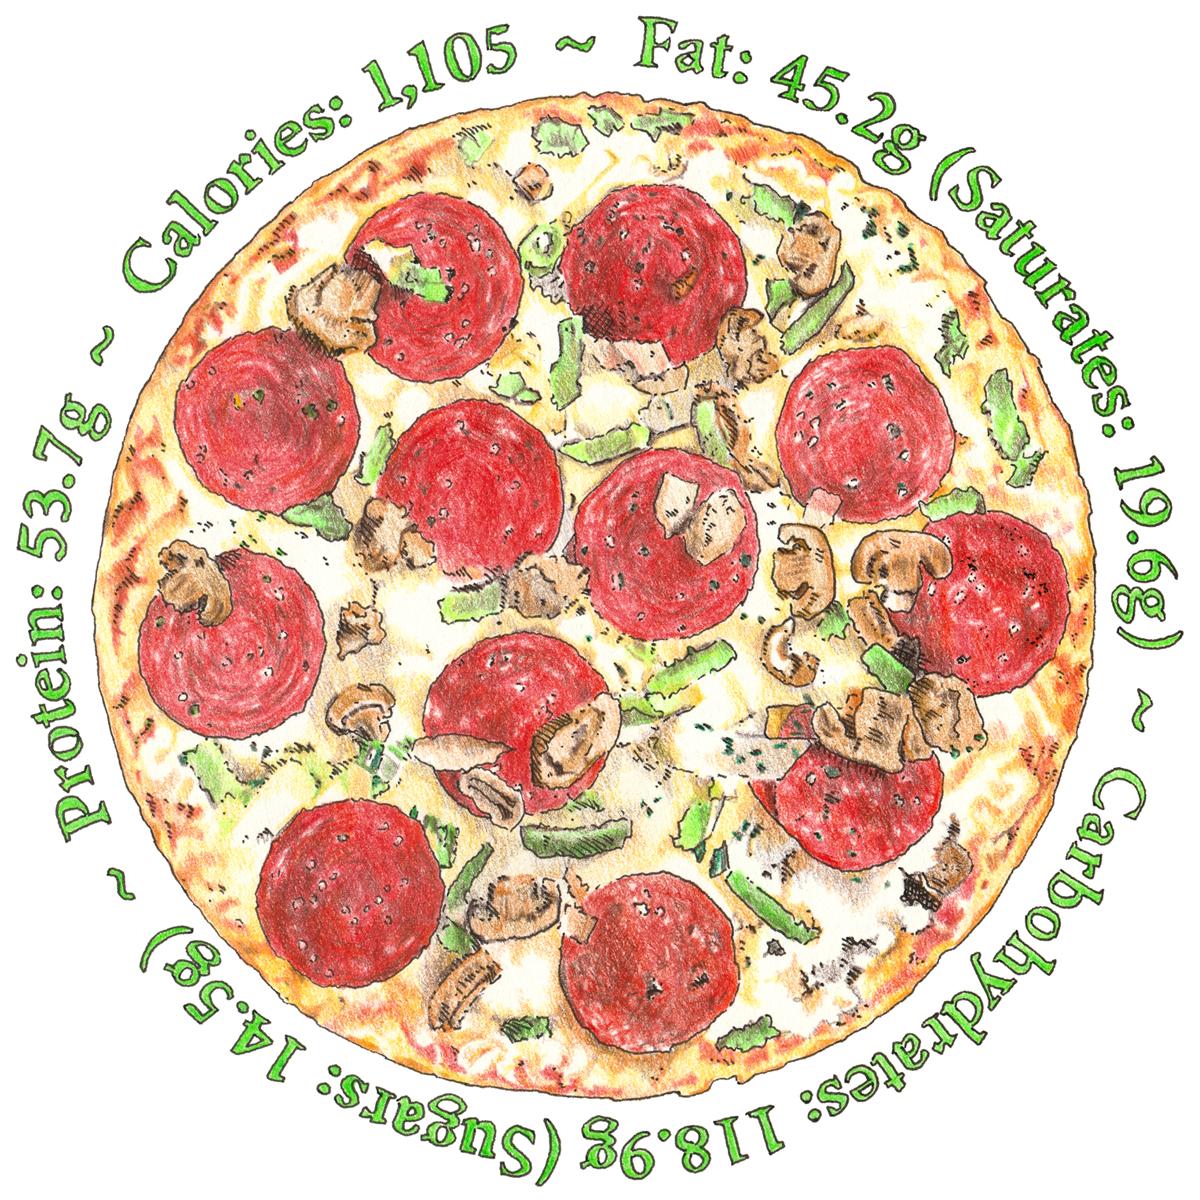 Limited edition print of coloured drawing of pizza